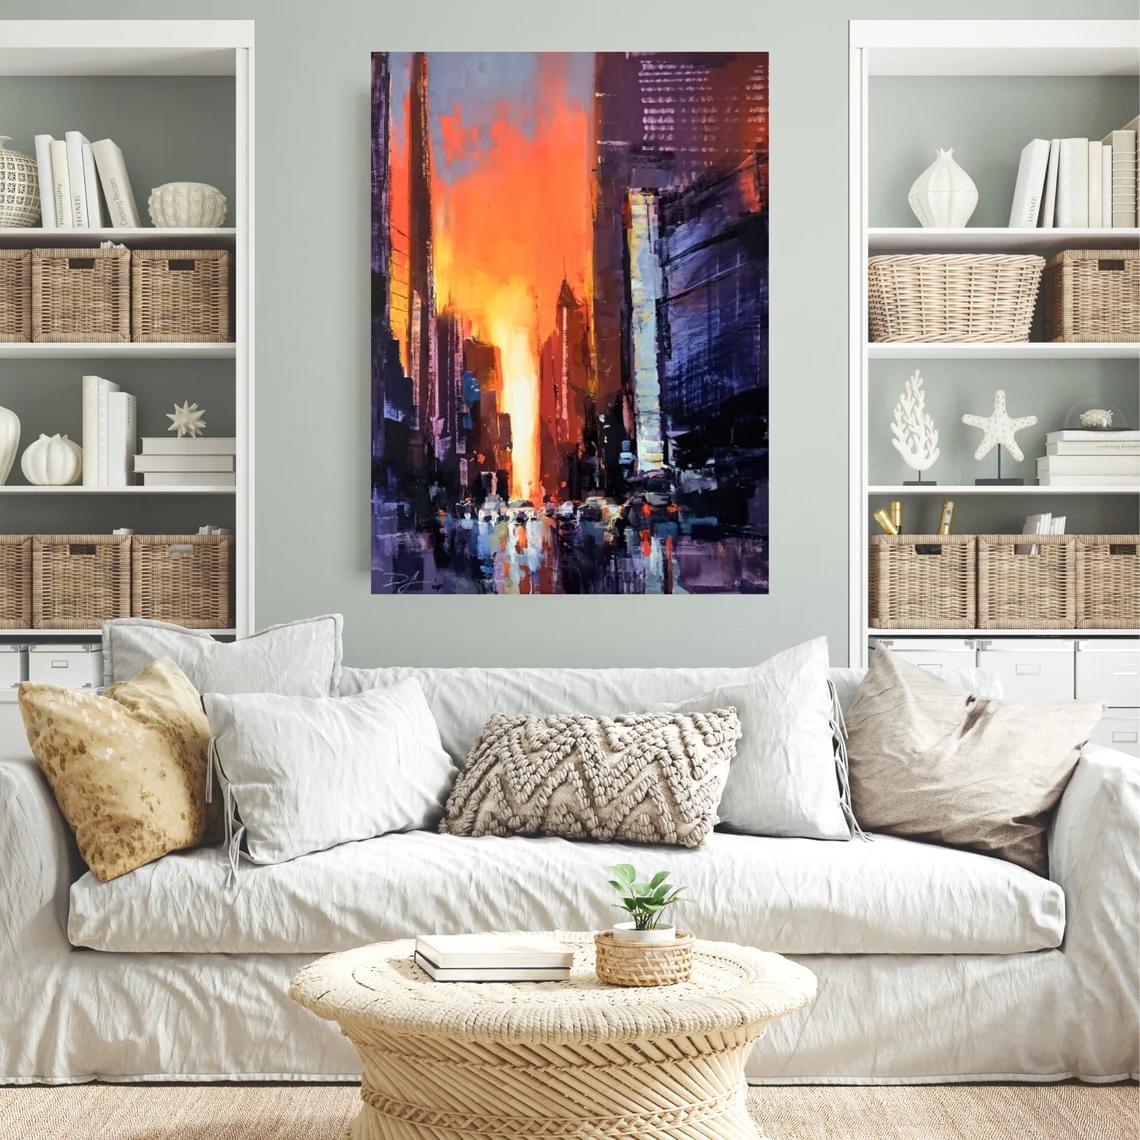 "Golden Gateway" - Cityscapes - Original Painting Sample on Wall